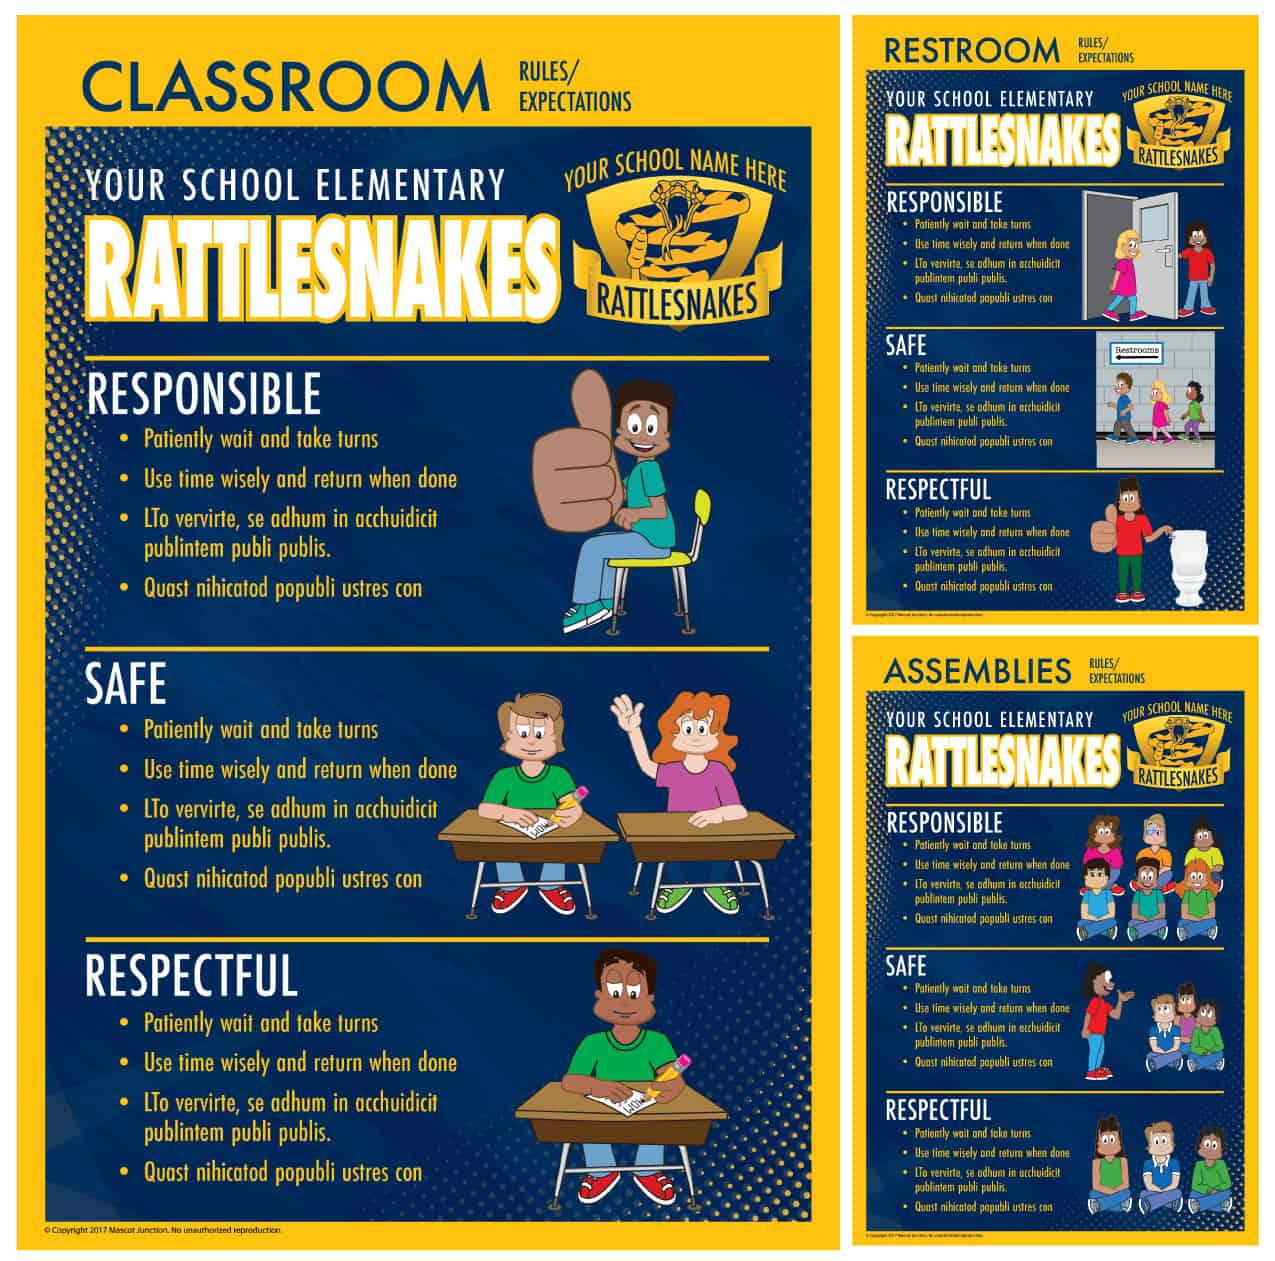 Rules-posters_Rattlesnake